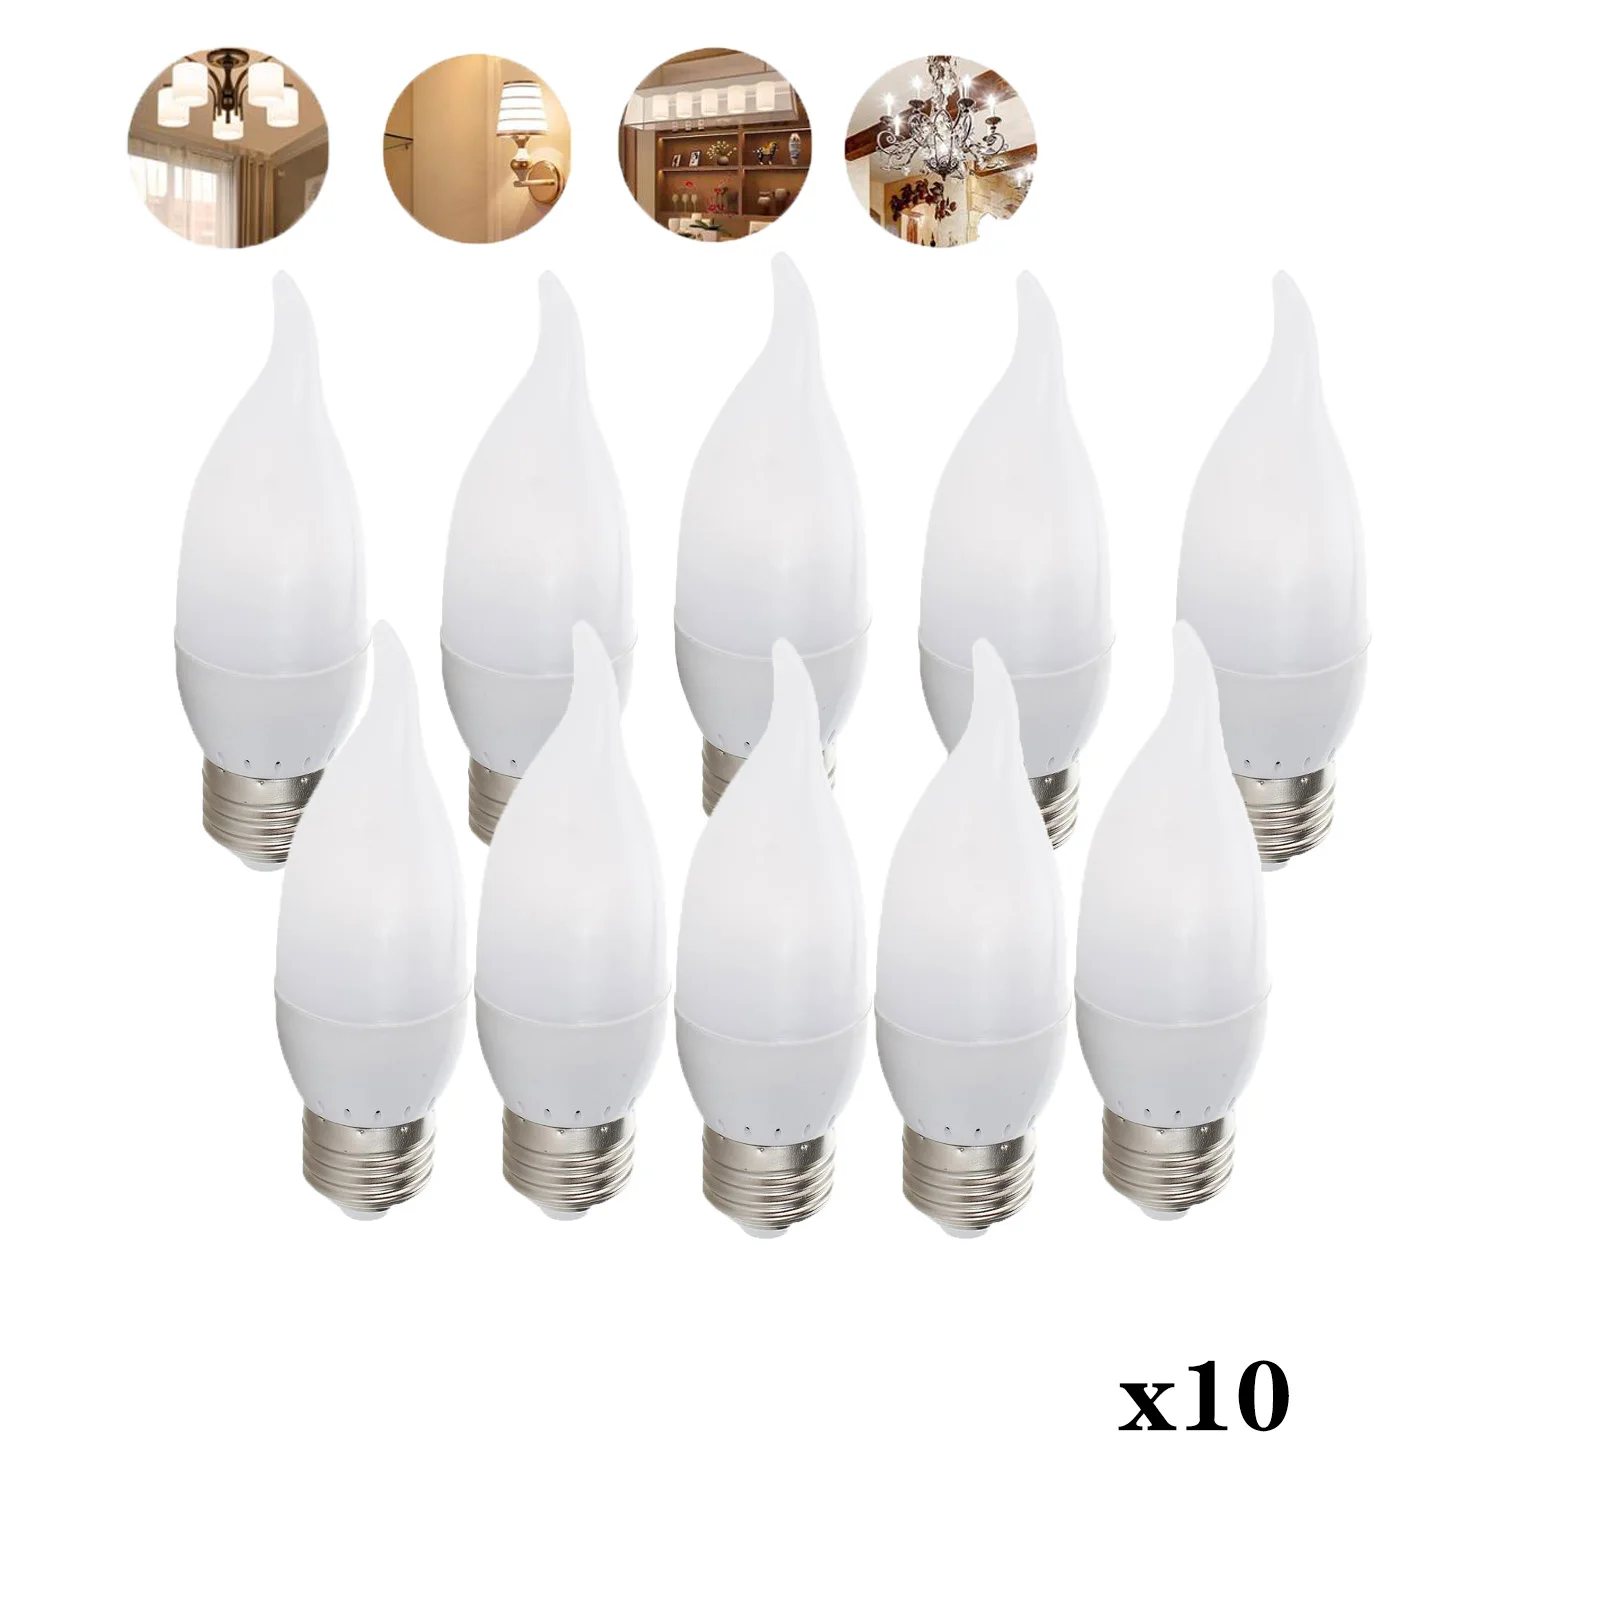 10X E12 / E26 / E27 / E14 / B22 / B15 Dimmable 2835 SMD Flame Chandelier Bulb LED, Replace 25W Halogen, for Home Decorate